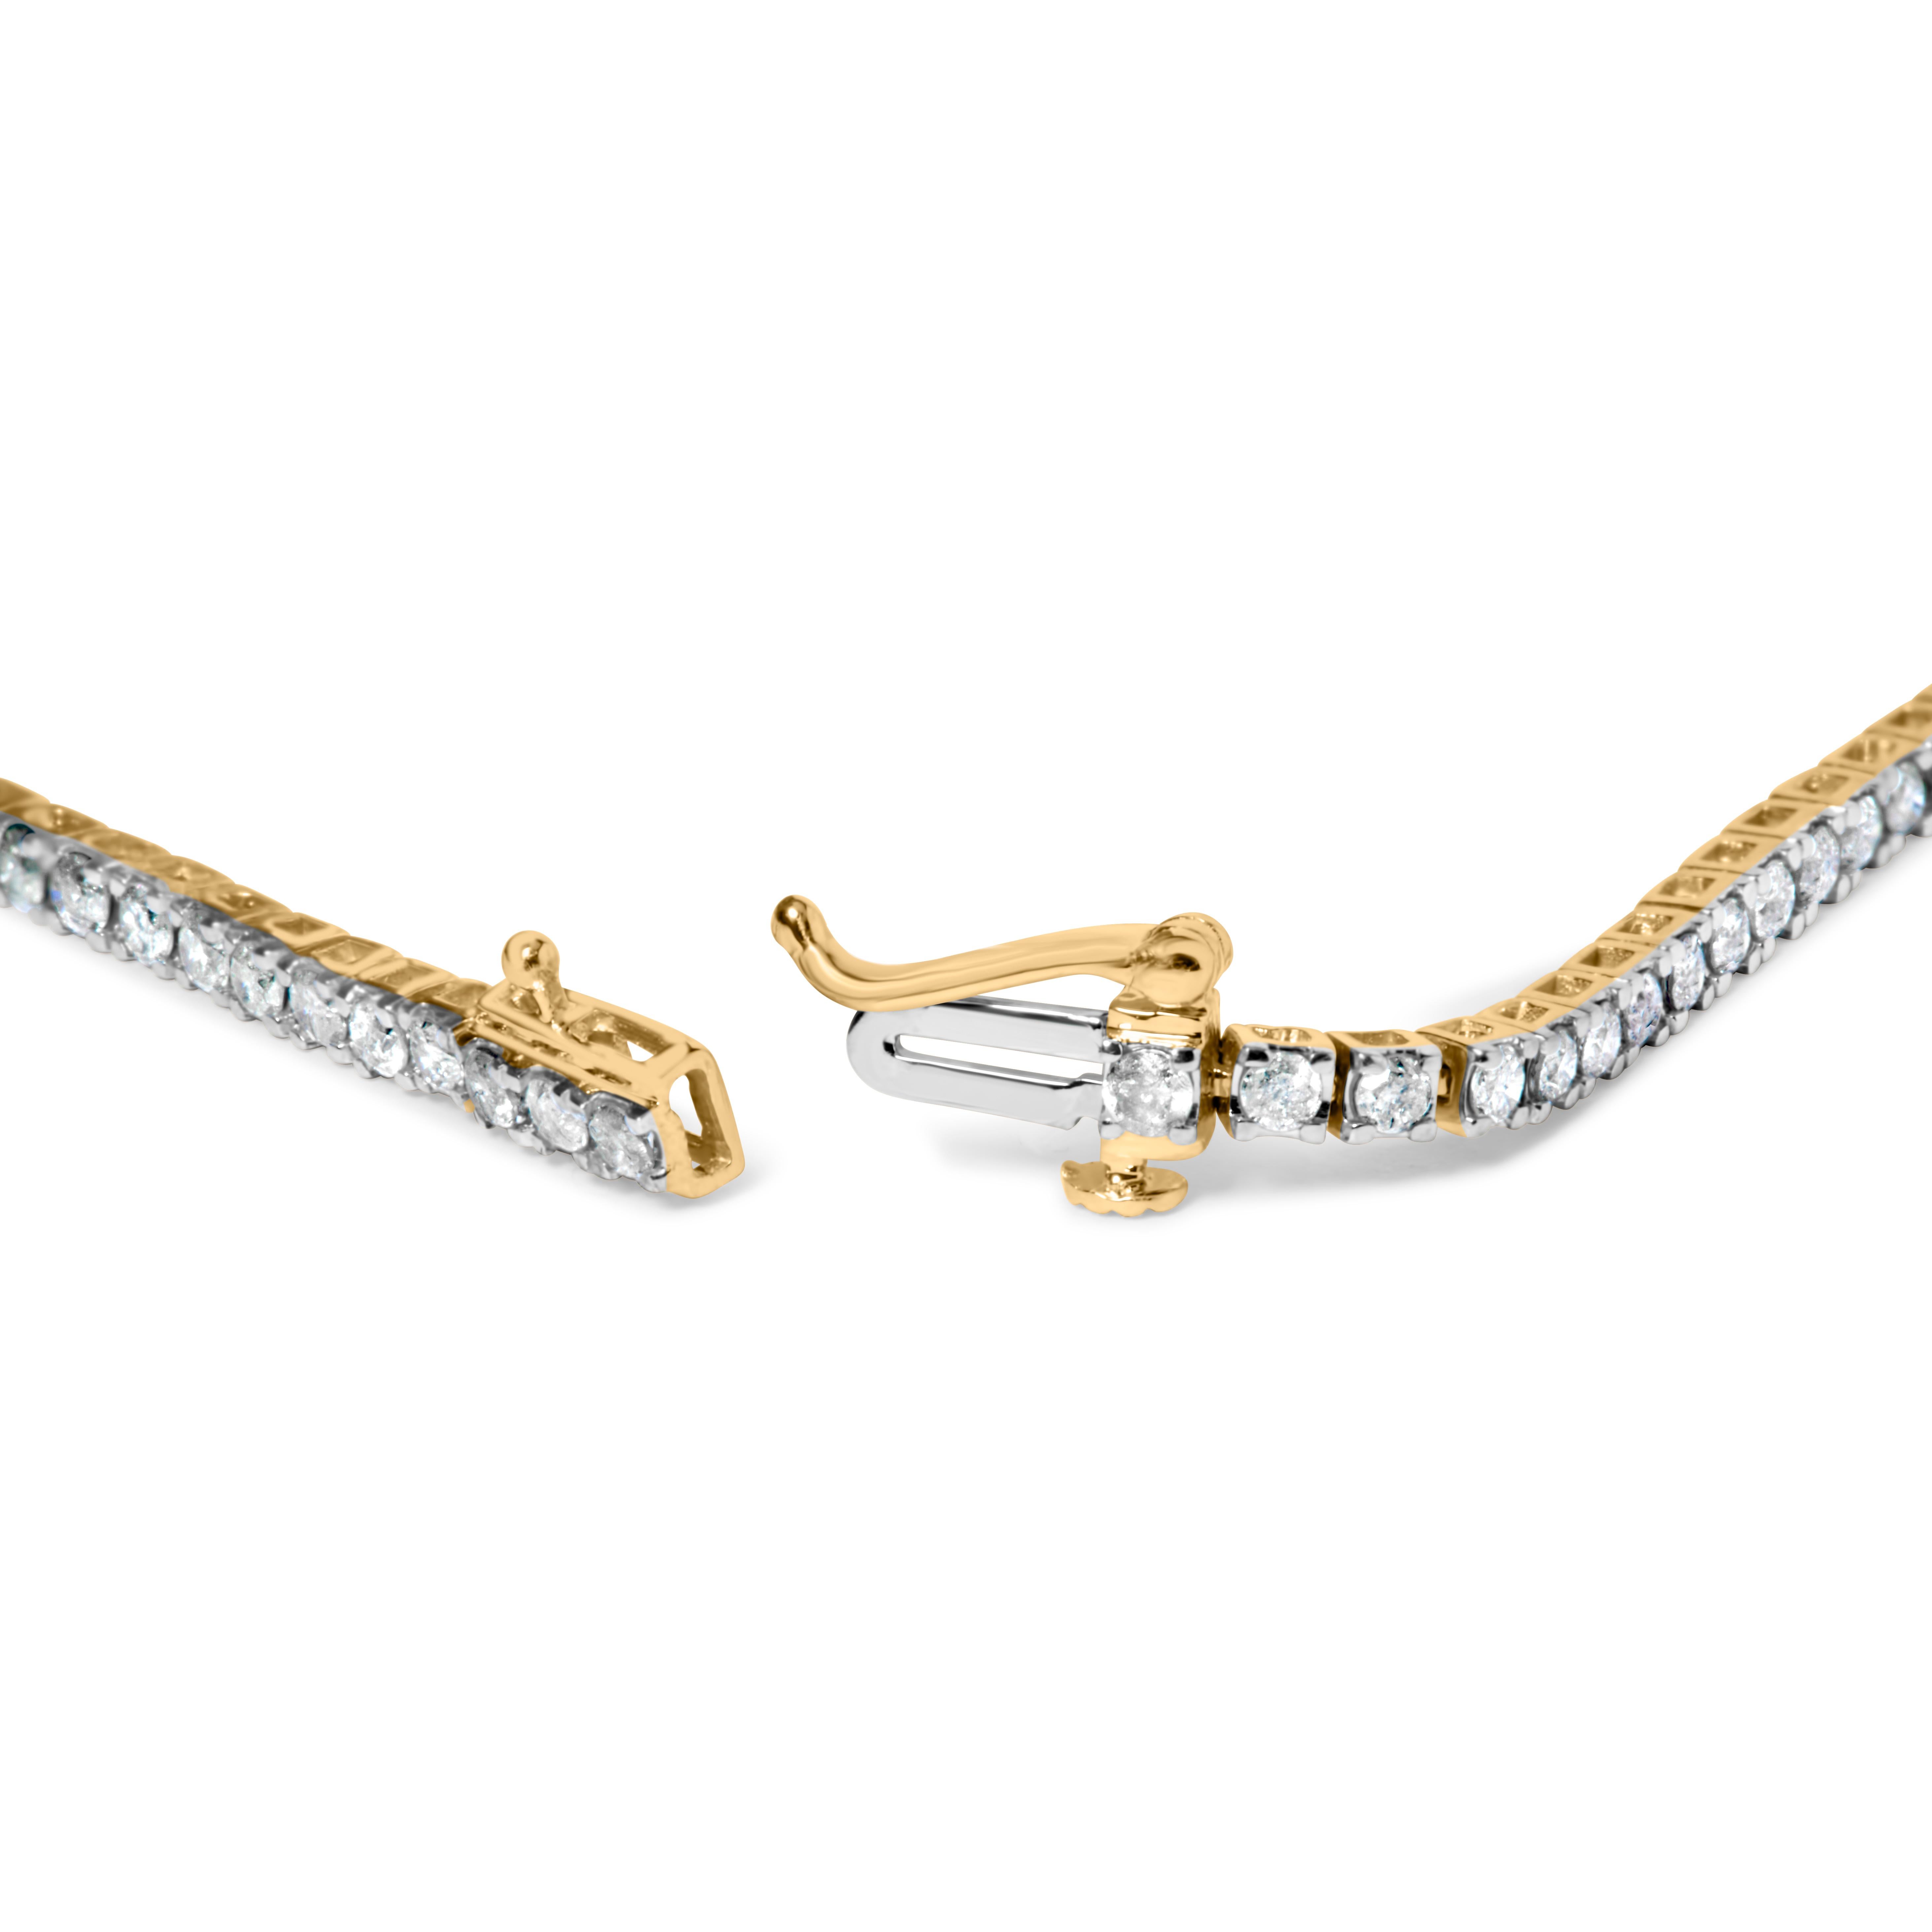 Elevate your elegance with our luxurious Diamond Tennis Bracelet, exquisitely crafted from .925 Sterling Silver and plated with 2 microns of 14K Yellow Gold. A 2-micron plating is significantly thicker than standard plating, providing a more durable